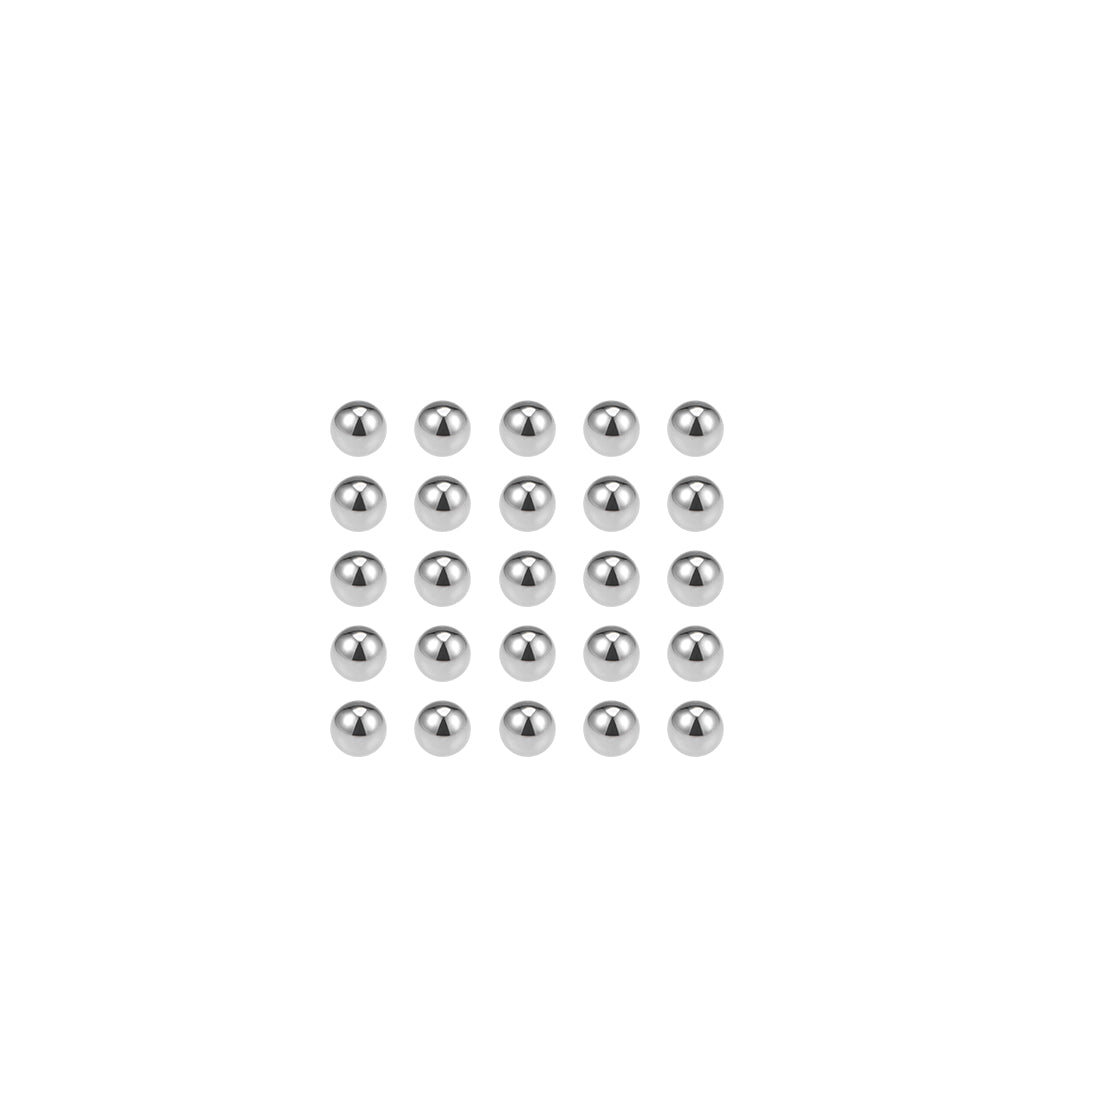 uxcell Uxcell Precision Balls 2.8mm Solid Chrome Steel G10 for Ball Bearing Bike Bicycle Keychain Wheel 25pcs